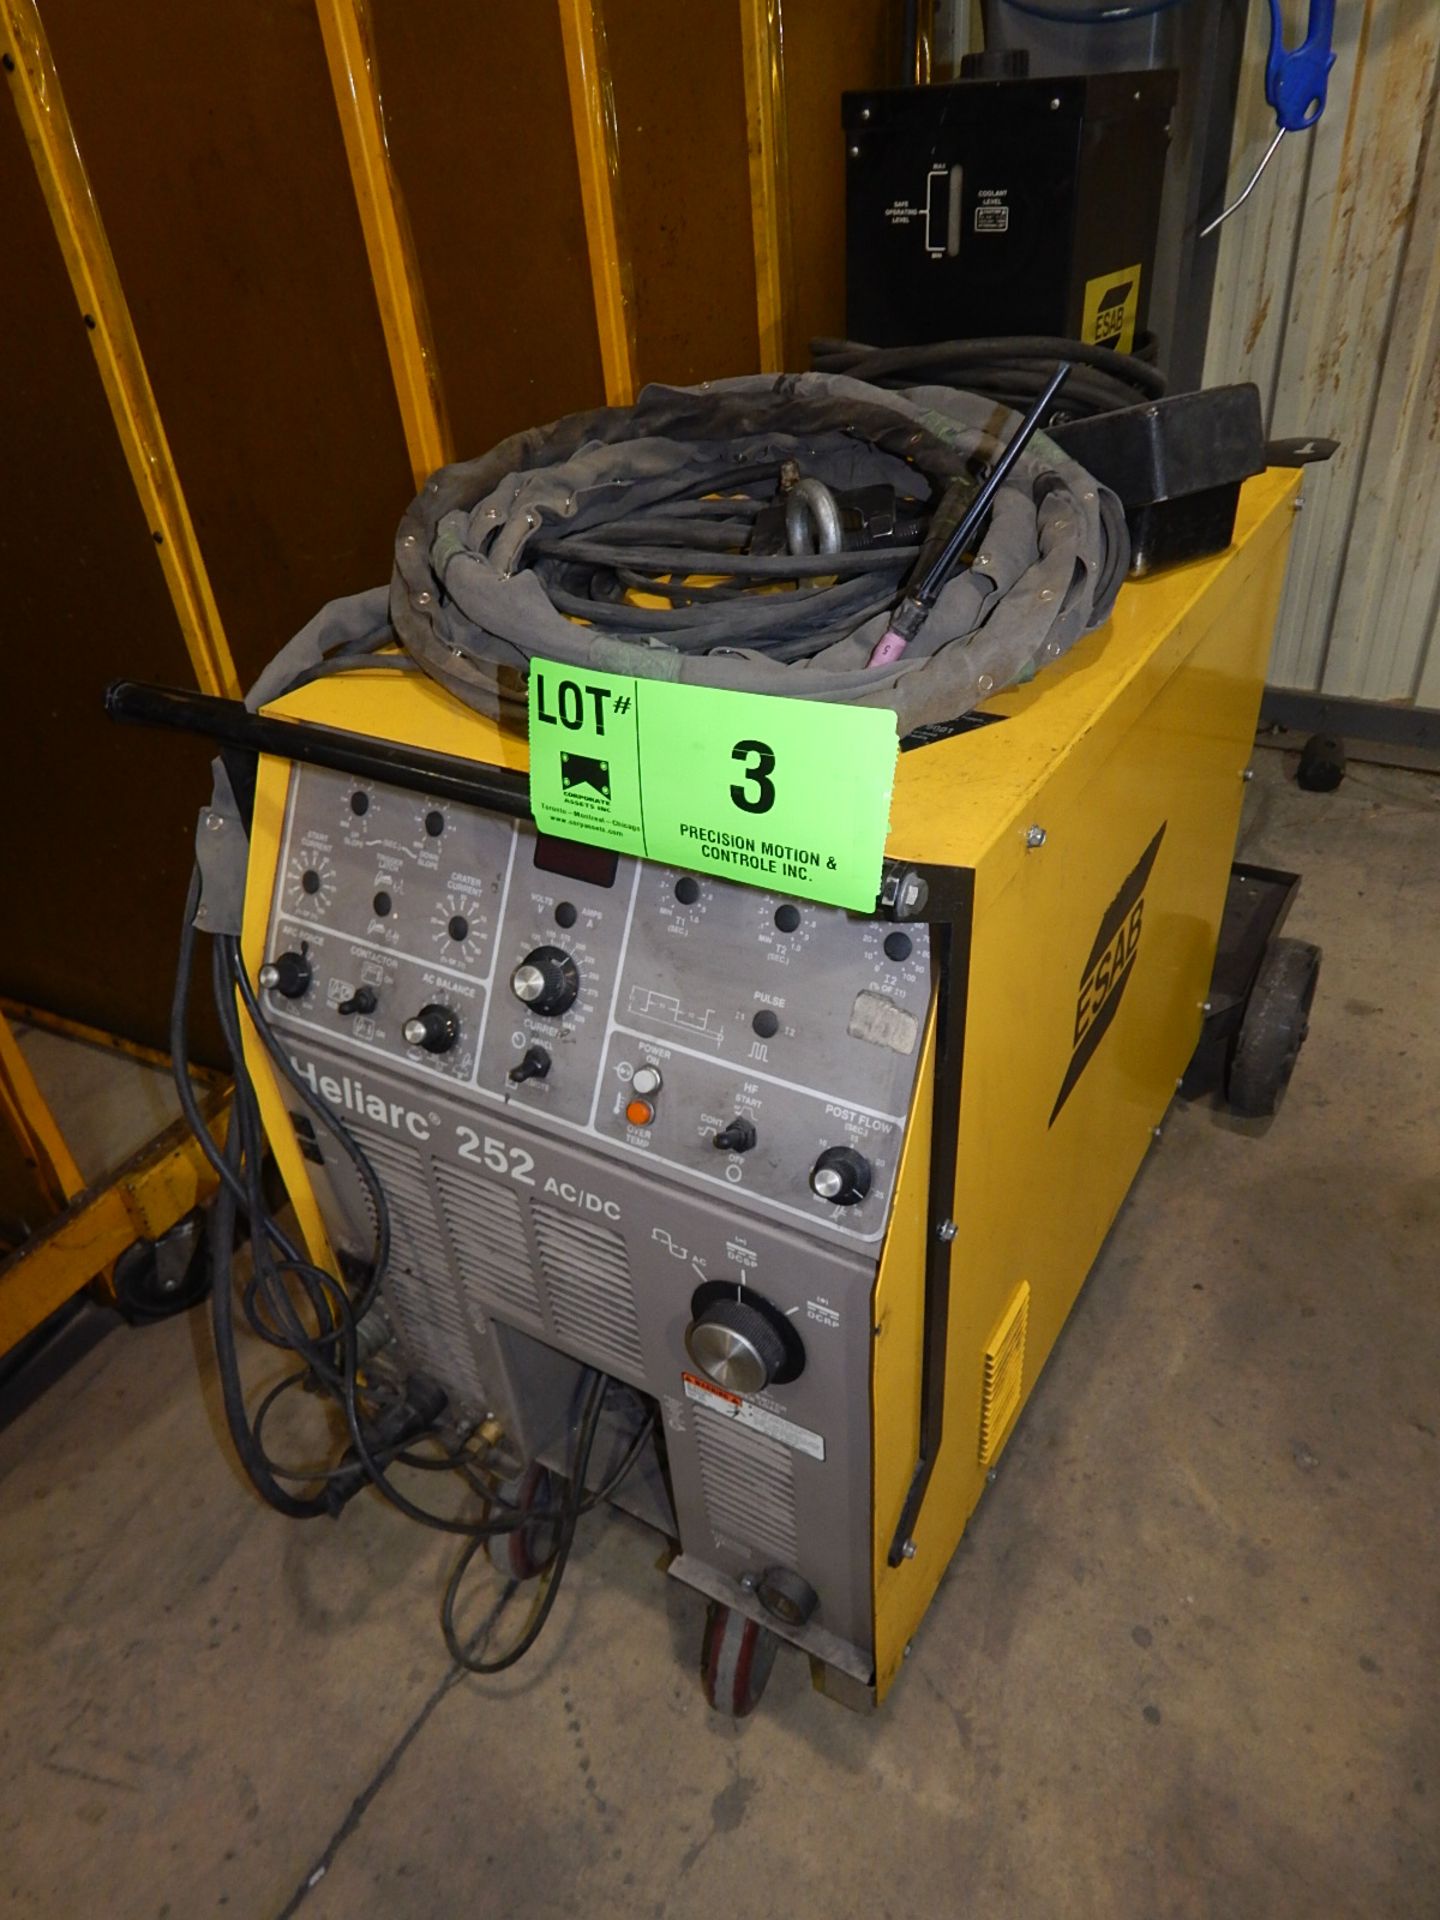 ESAB HELIARC 252 AC/DC ARC WELDER WITH COOLANT, CABLES AND GUN, S/N: TL-J209001